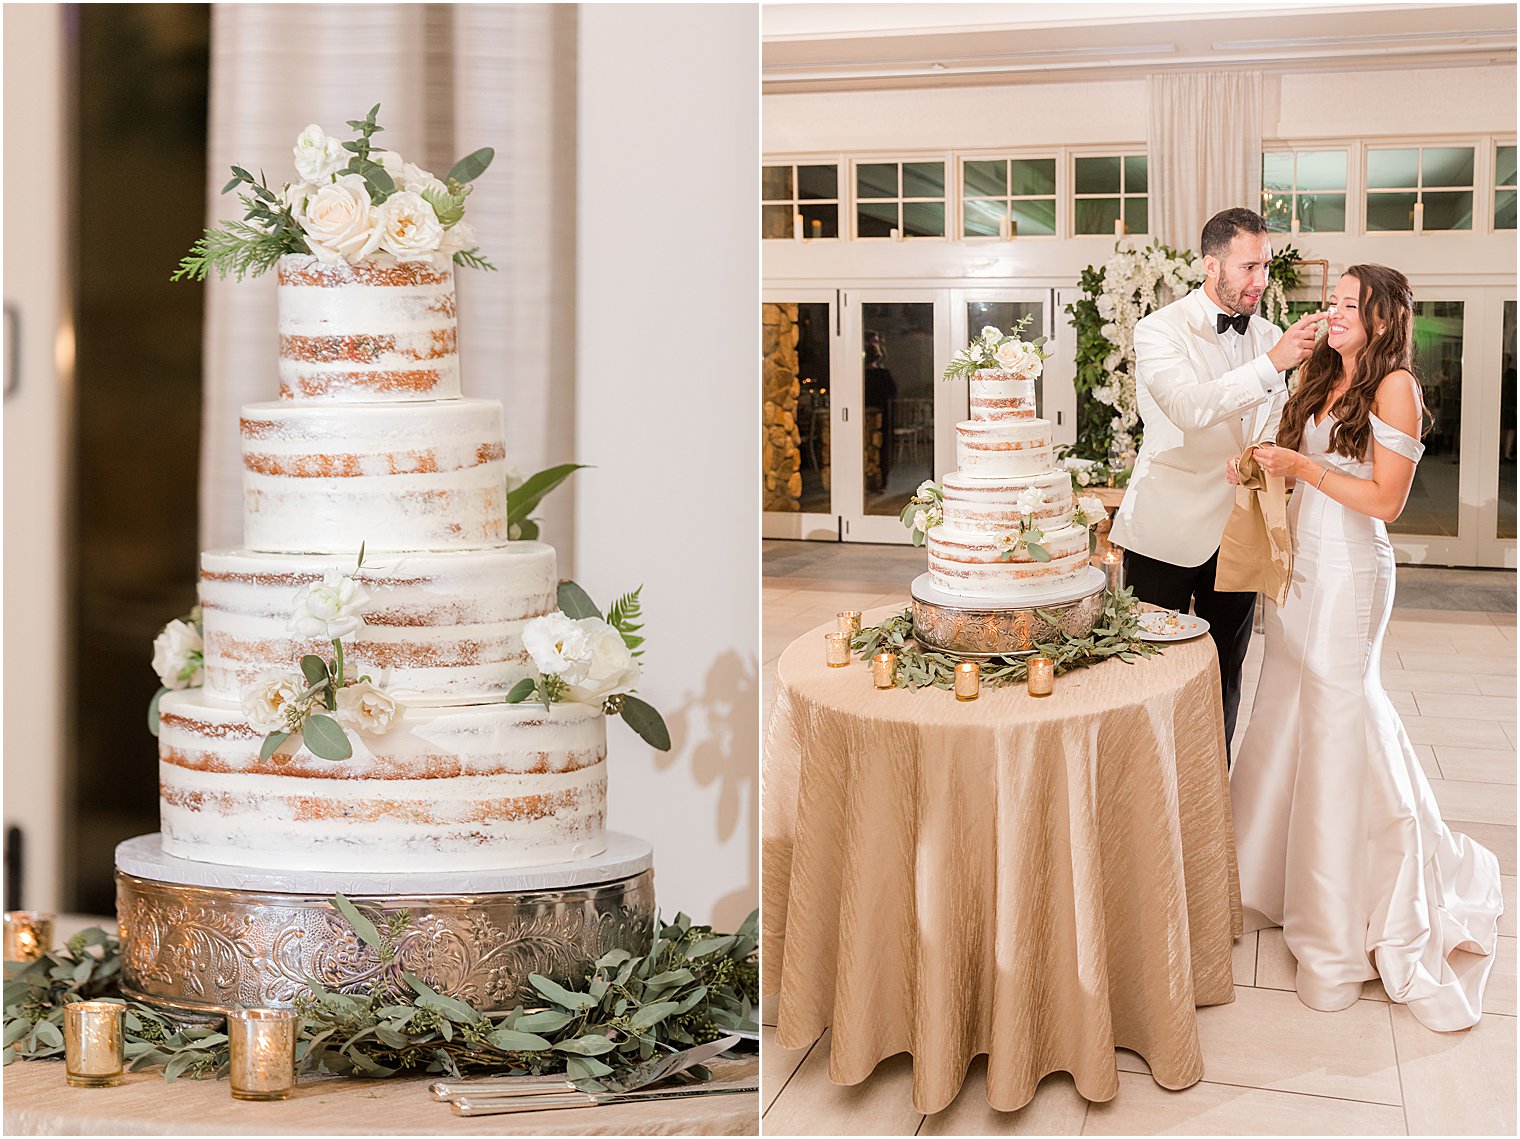 married couple poses by tiered wedding cake at Franklin Lakes NJ wedding reception